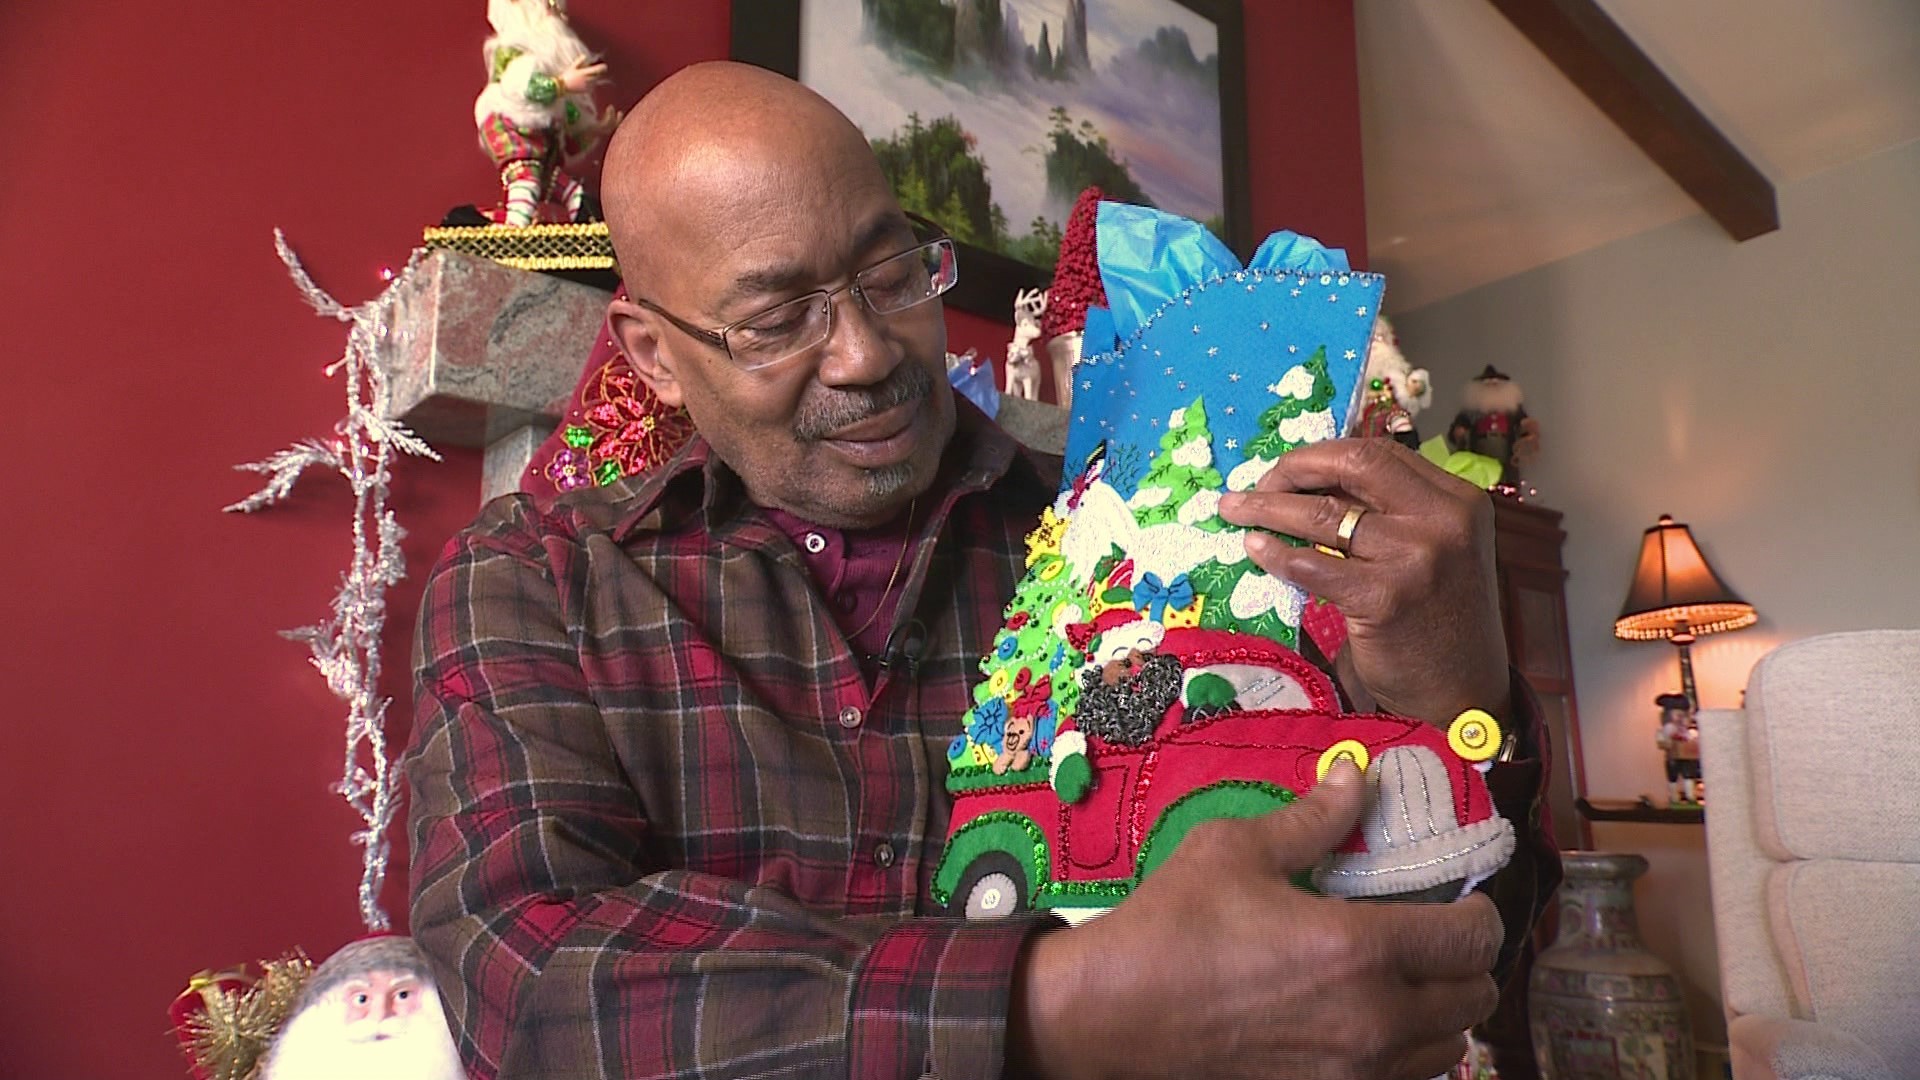 Janet Warner gives the gift of representation with her hand-made Christmas decorations. #k5evening